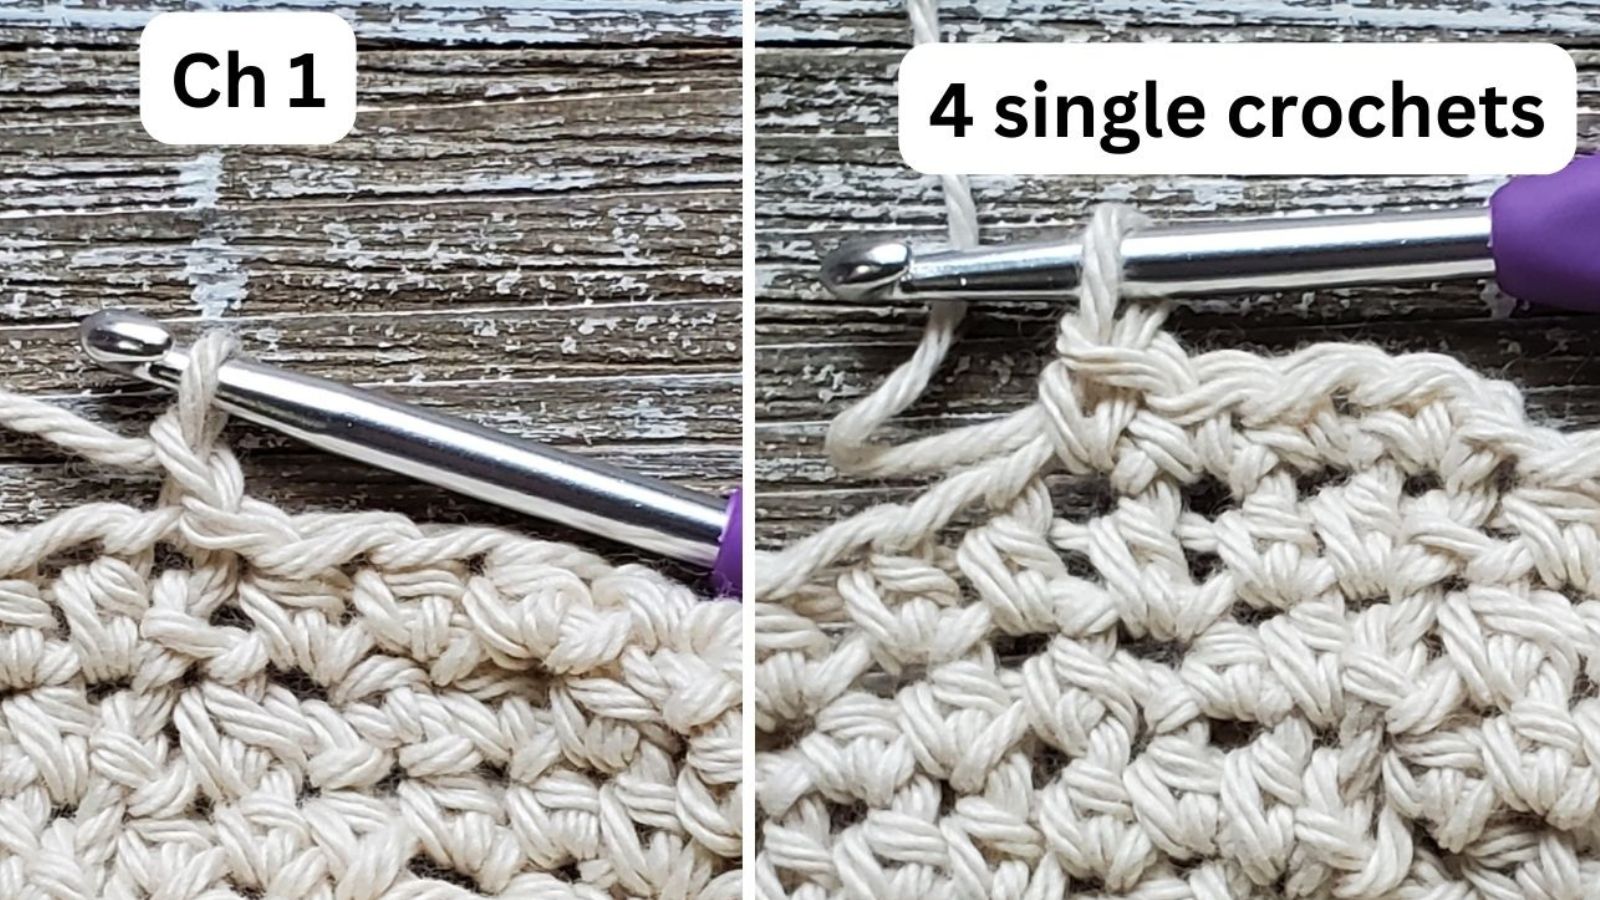 the 4 single crochets that start the ring of the bag holder